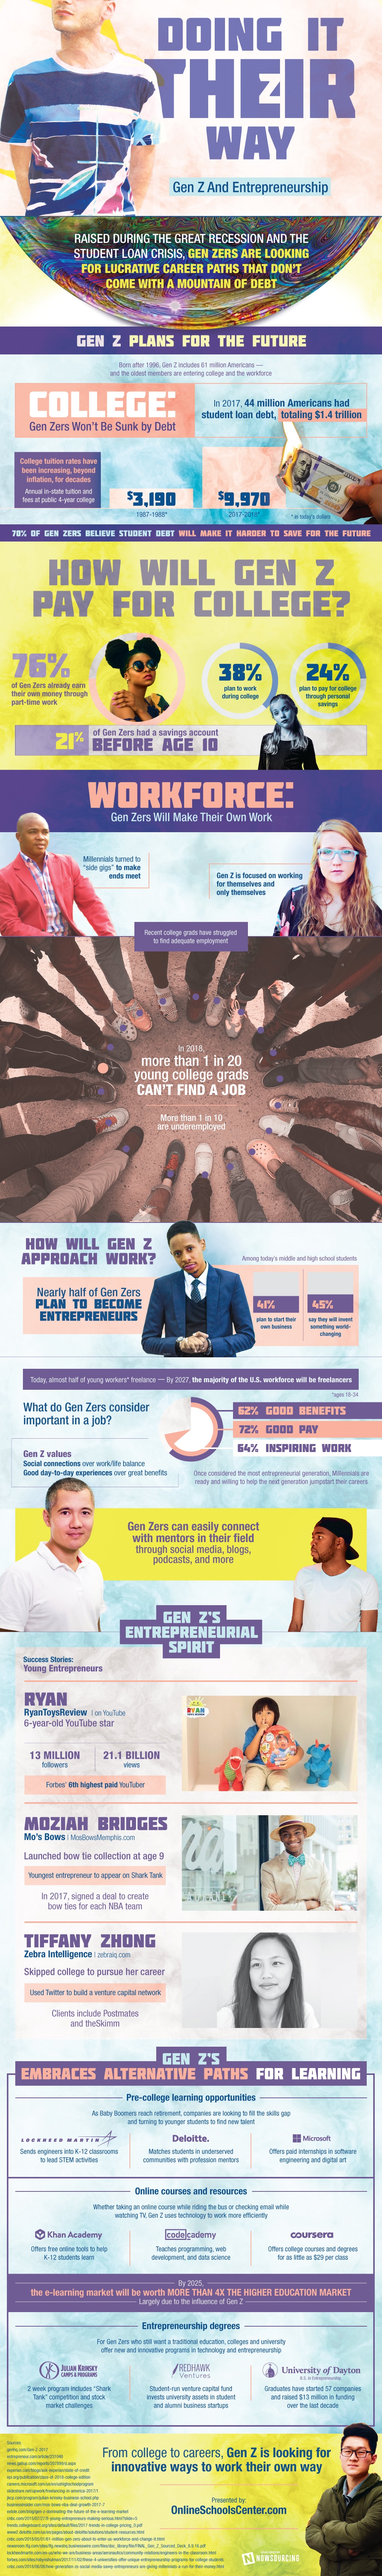 Is GenZ Ready To Take The Entrepreneurial Reins? [Infographic]